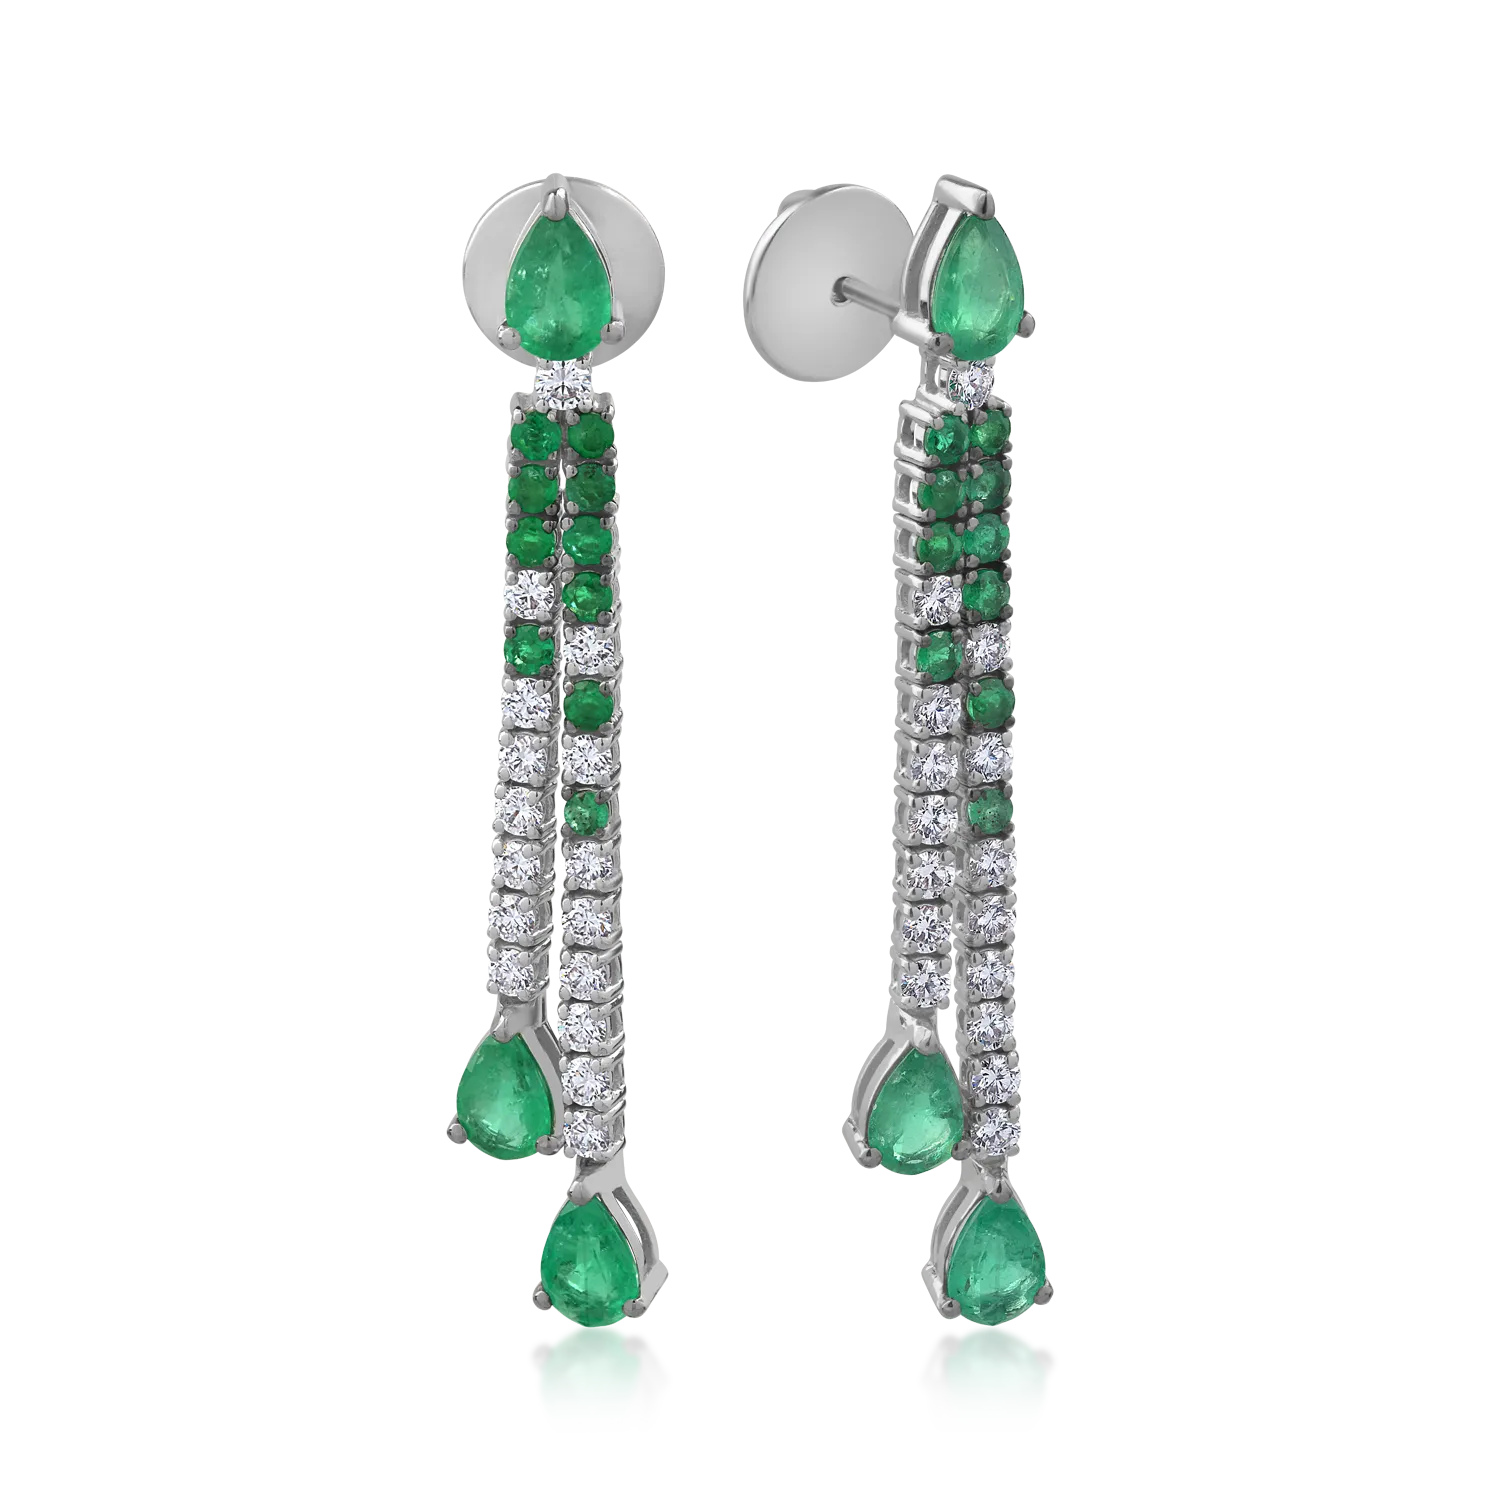 18K white gold earrings with 2.81ct emeralds and 0.95ct diamonds